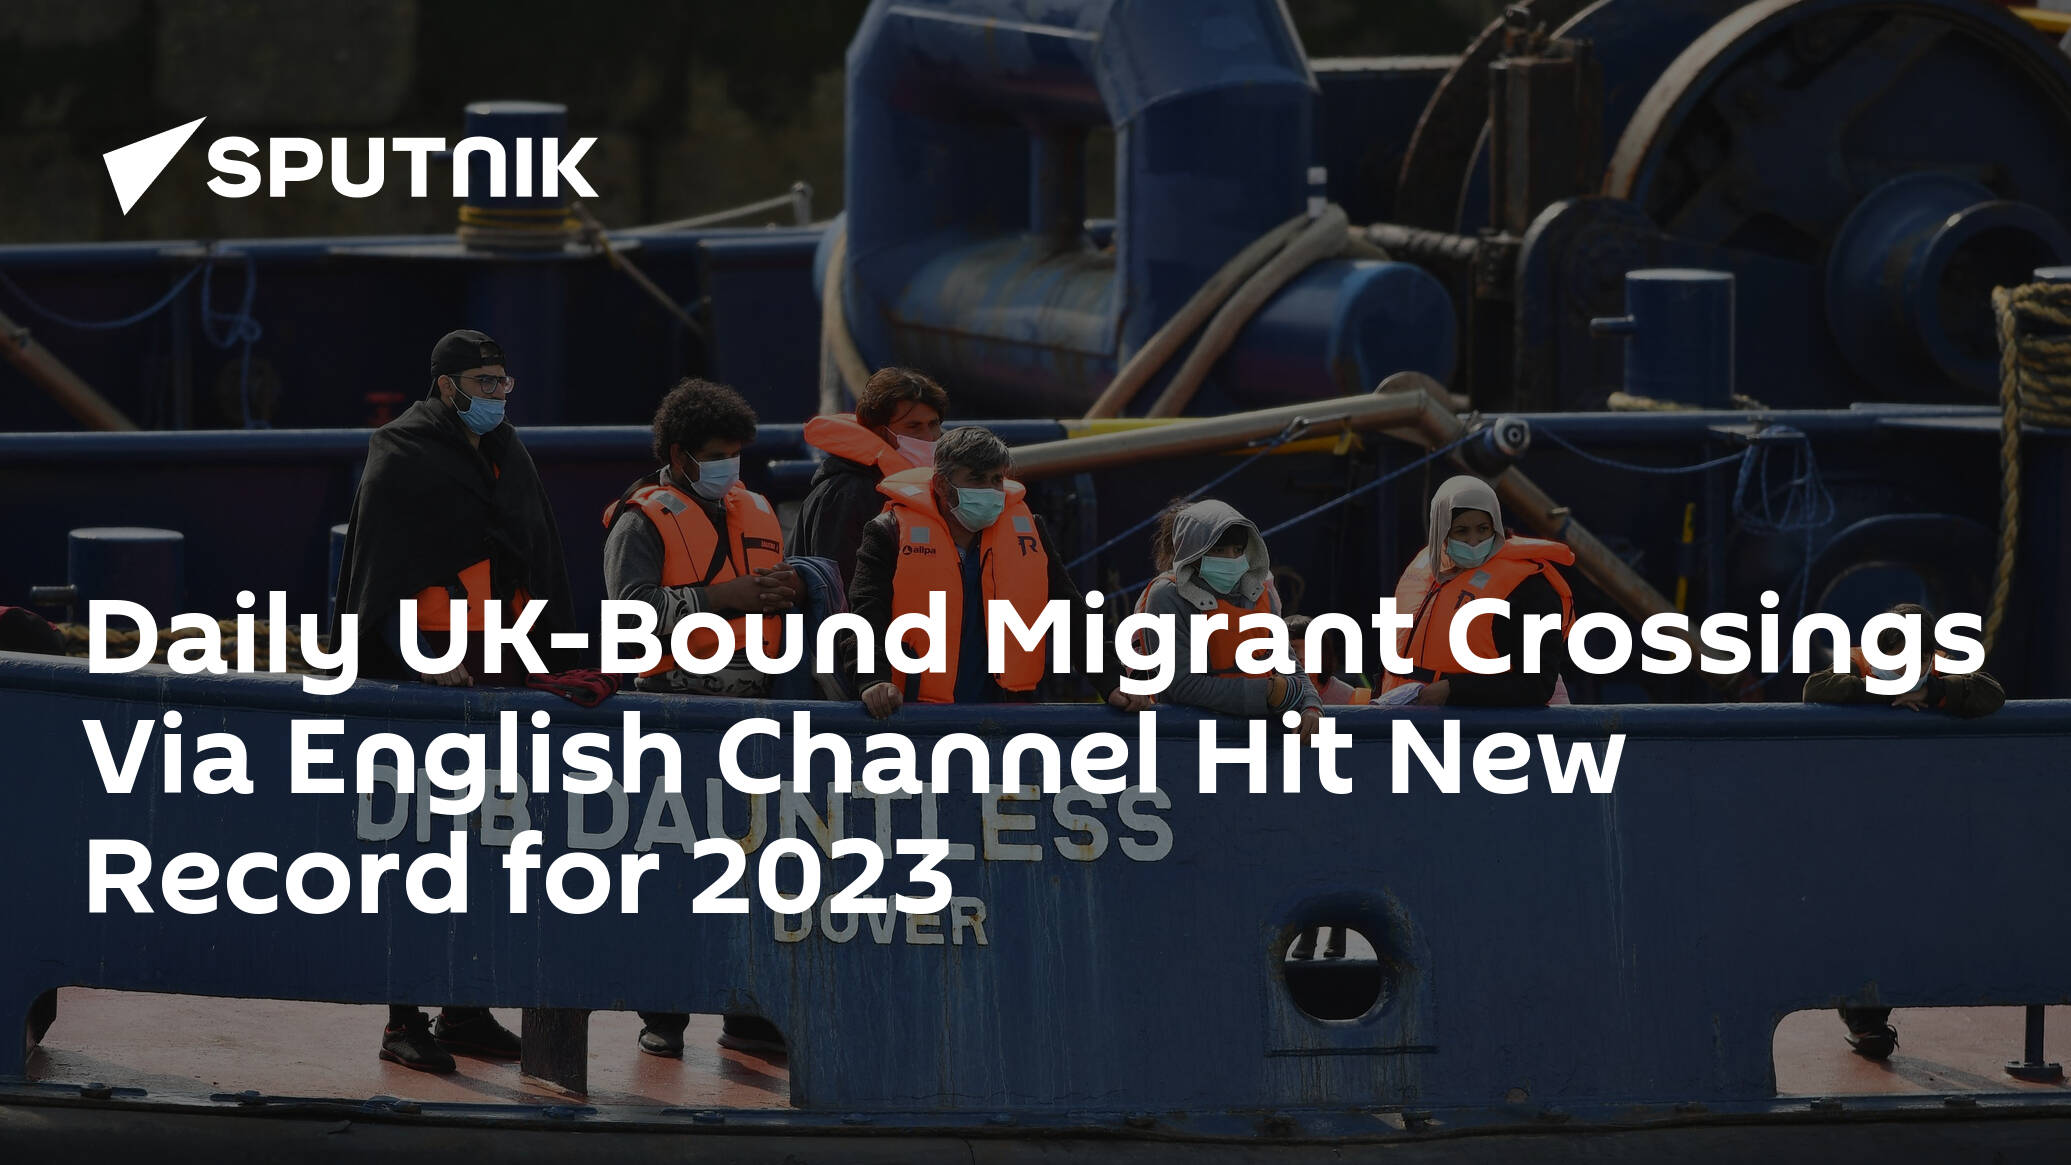 Daily UK-Bound Migrant Crossings Via English Channel Hit New Record for 2023